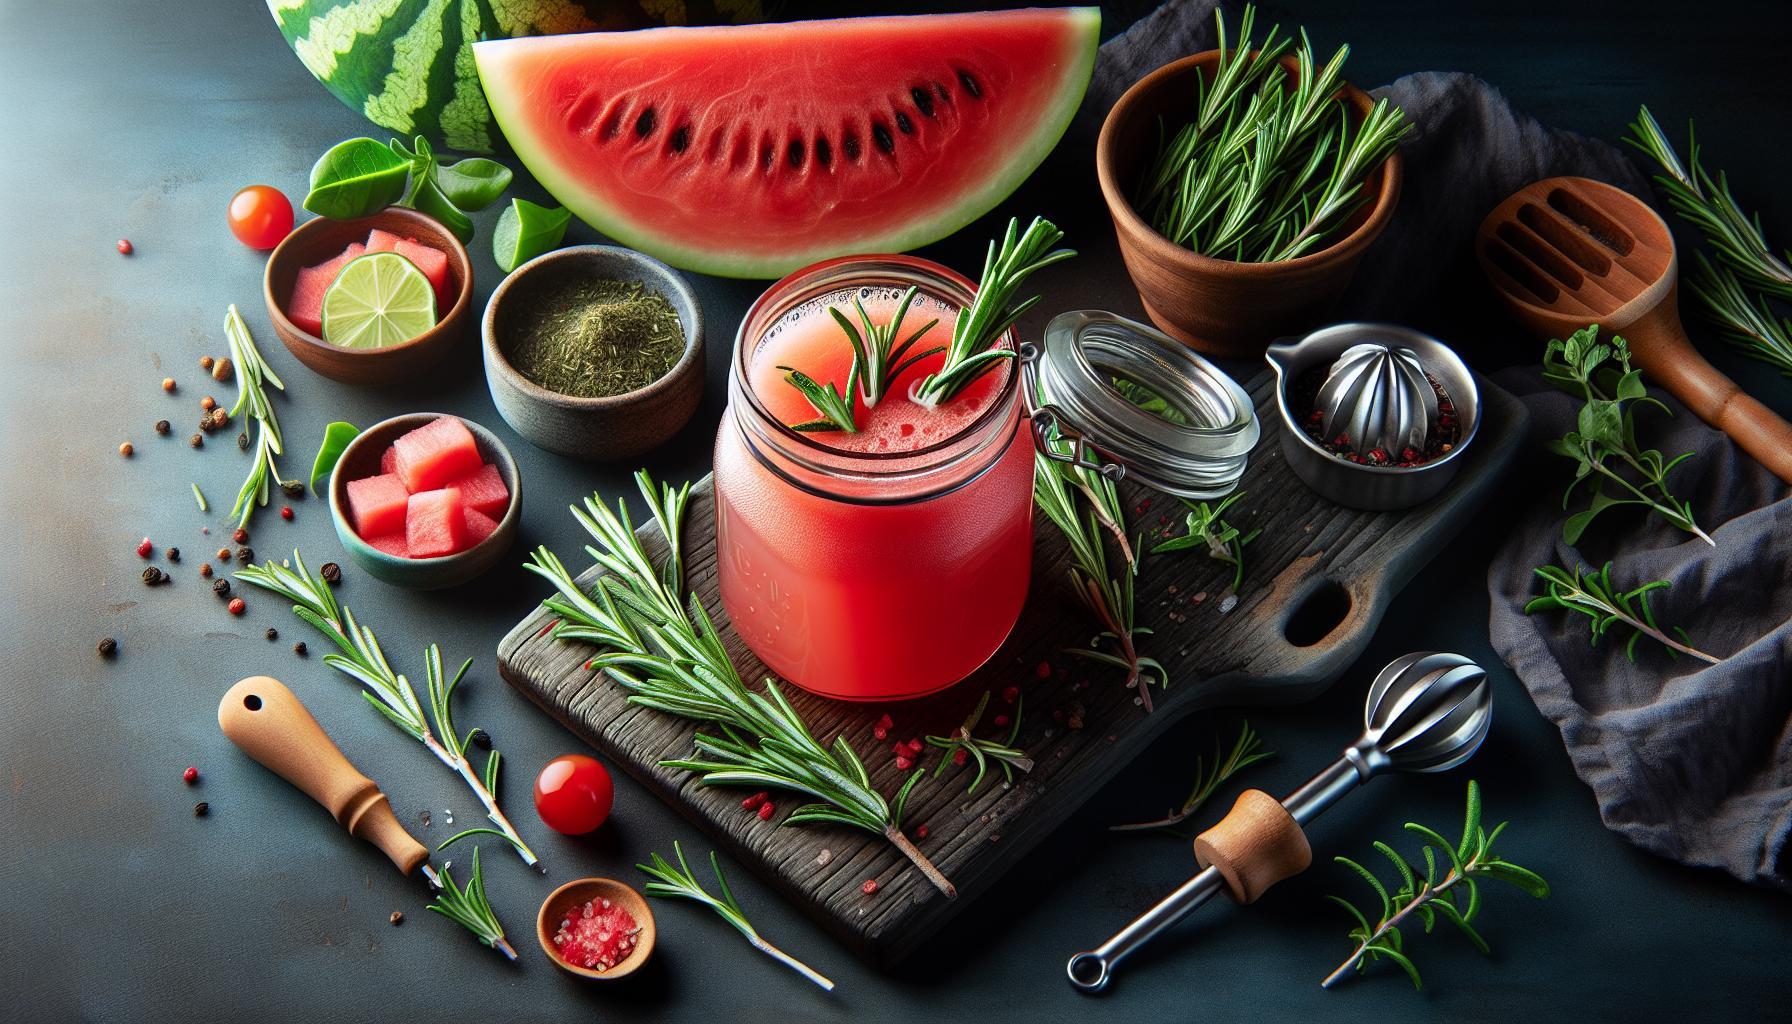 How to Make Rosemary Infused Watermelon Juice | Rosemary Infused Watermelon Juice Recipe